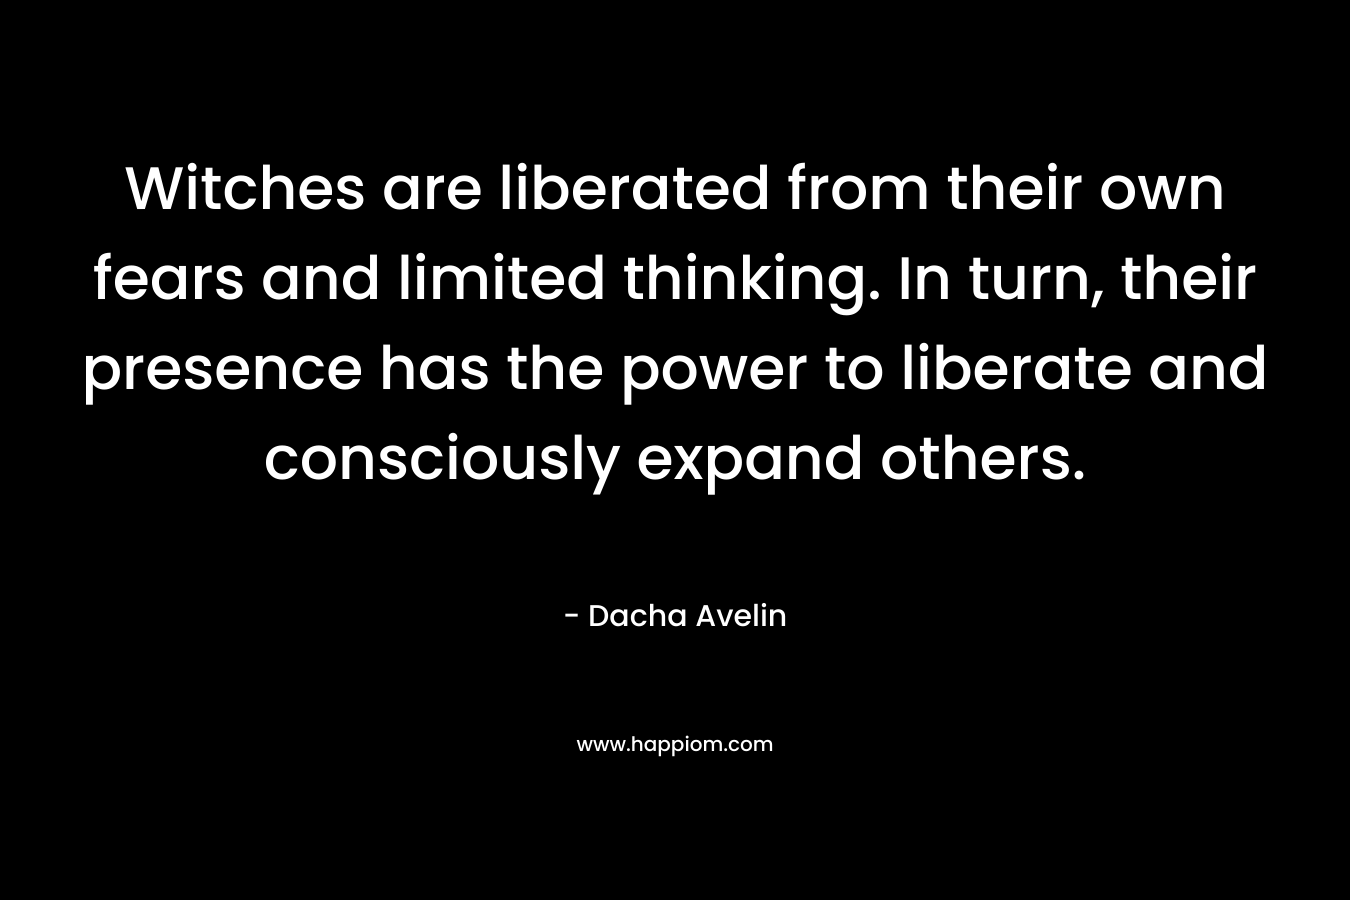 Witches are liberated from their own fears and limited thinking. In turn, their presence has the power to liberate and consciously expand others. – Dacha Avelin